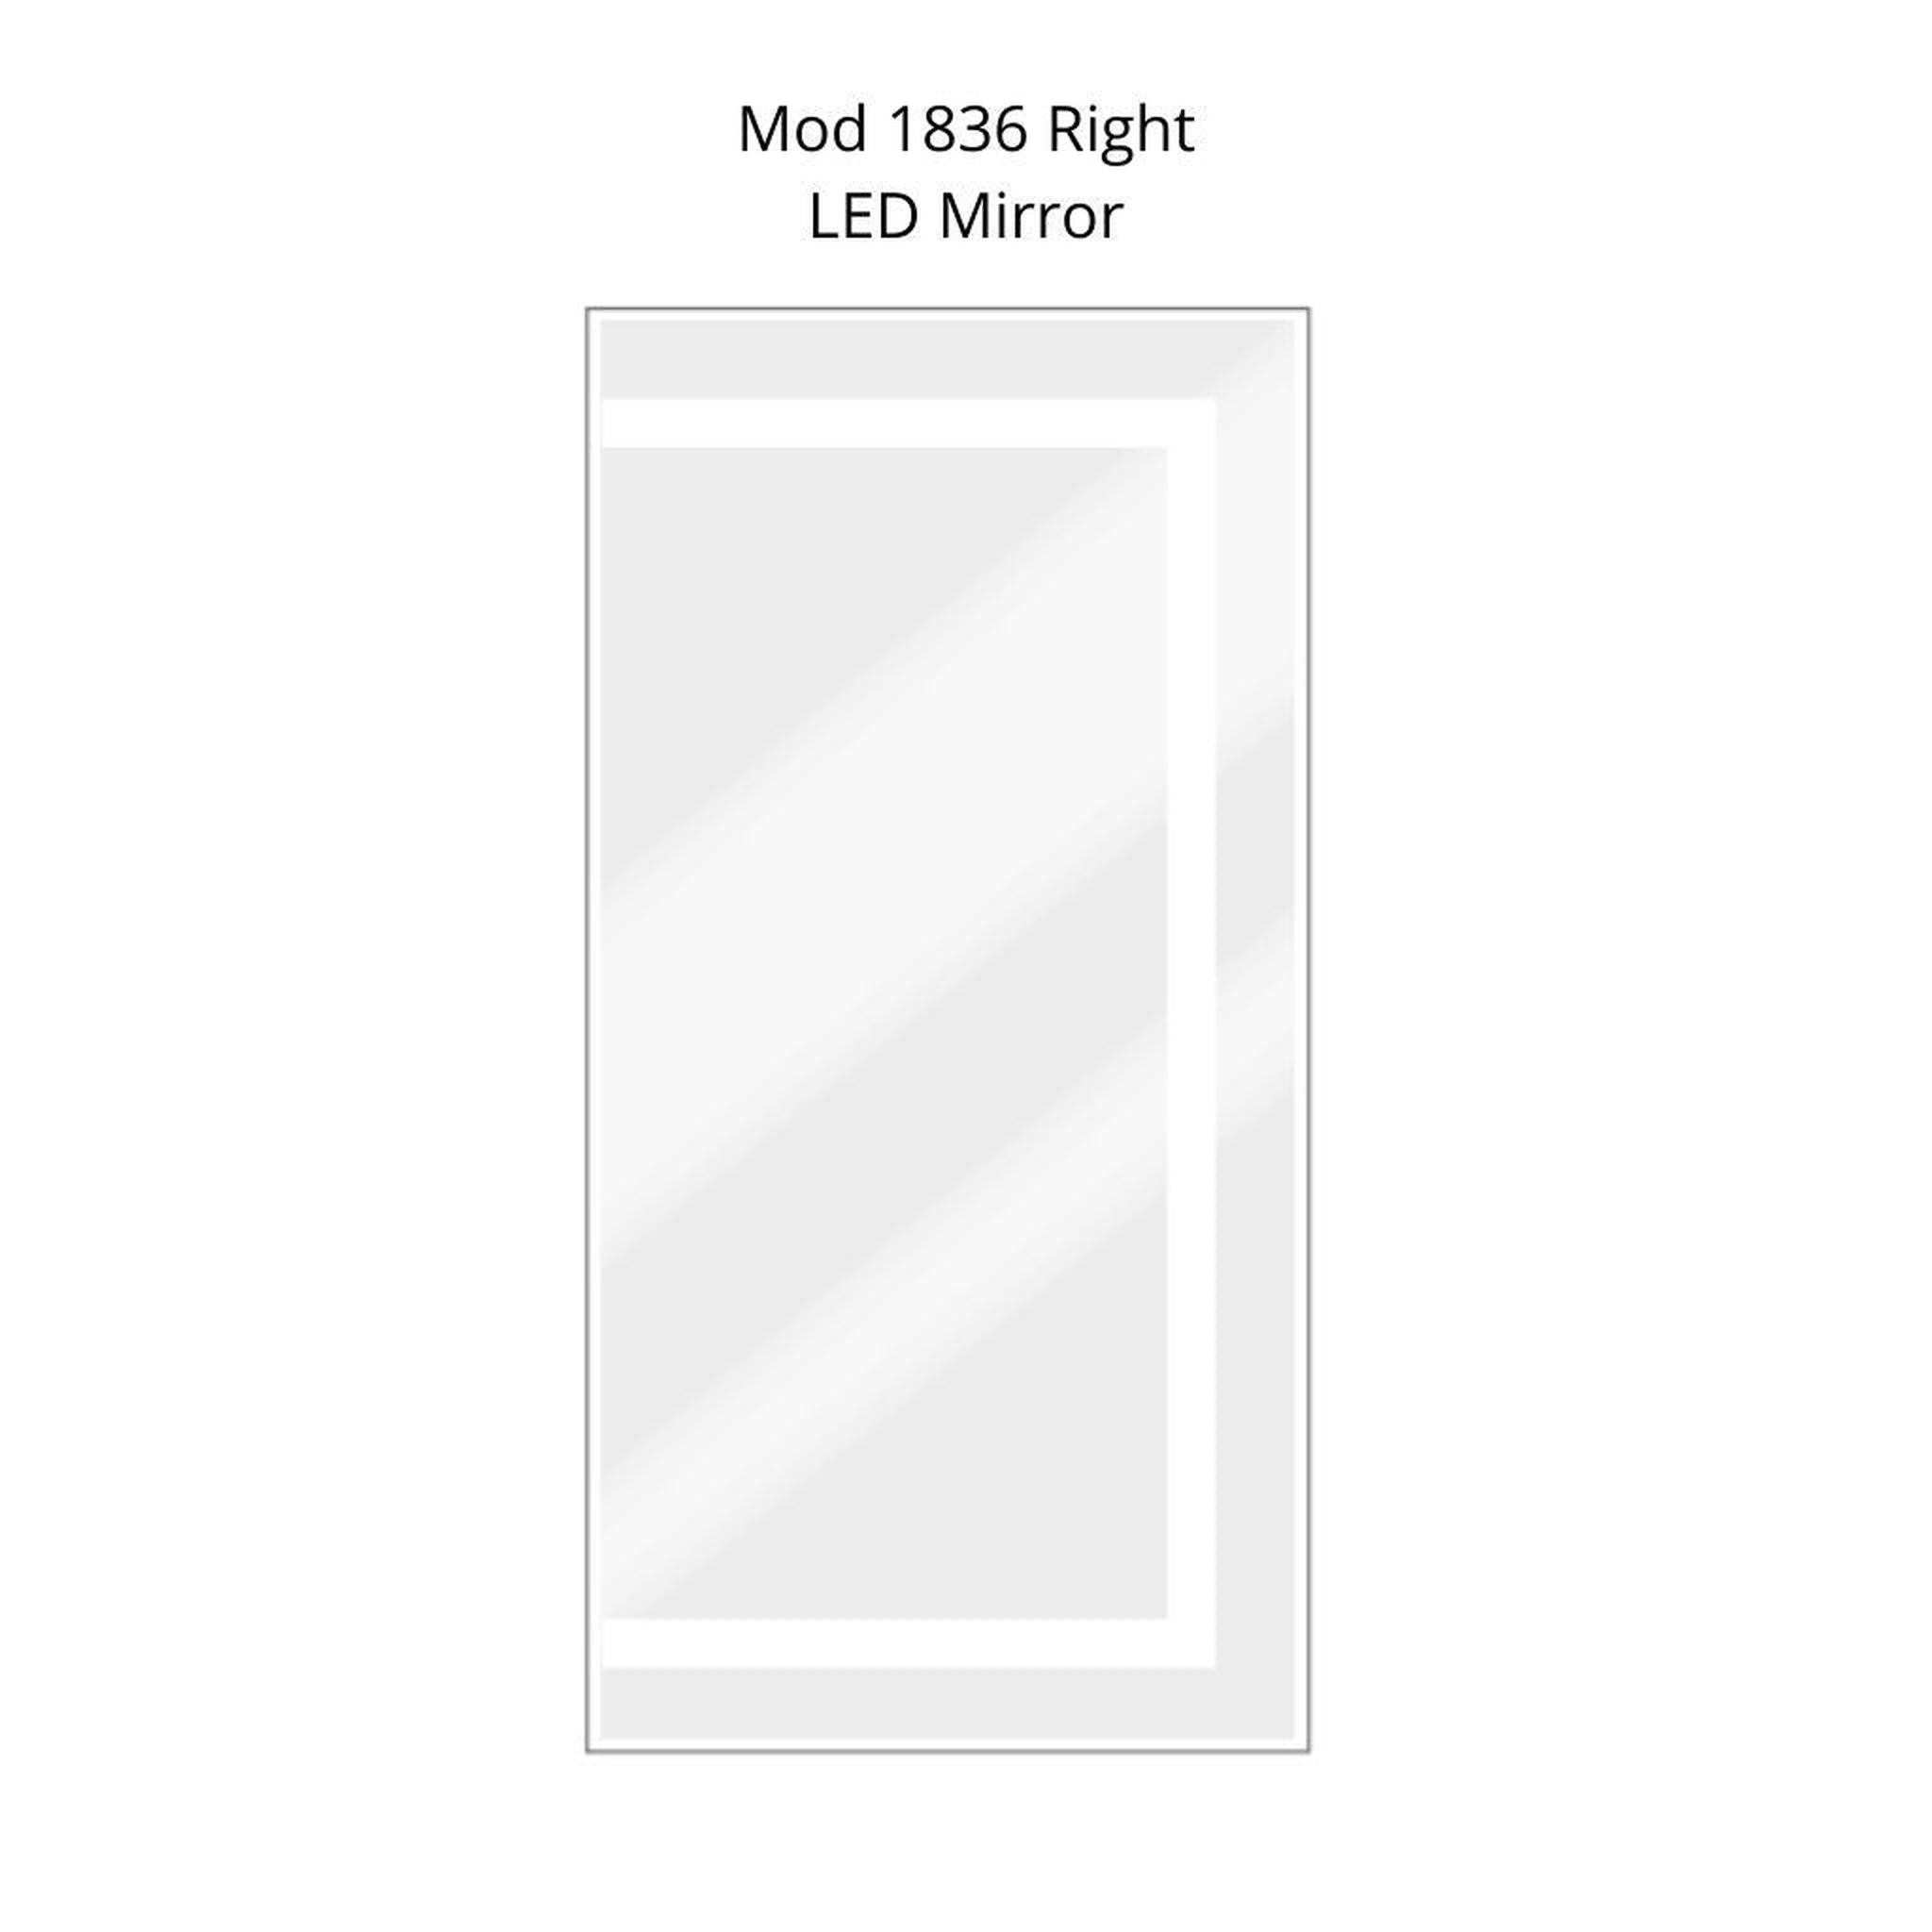 Krugg Reflections, Krugg Reflections Mod 18" x 36" 5000K Rectangular Right Configuration Wall-Mounted Silver-Backed LED Bathroom Vanity Mirror With Built-in Defogger and Dimmer